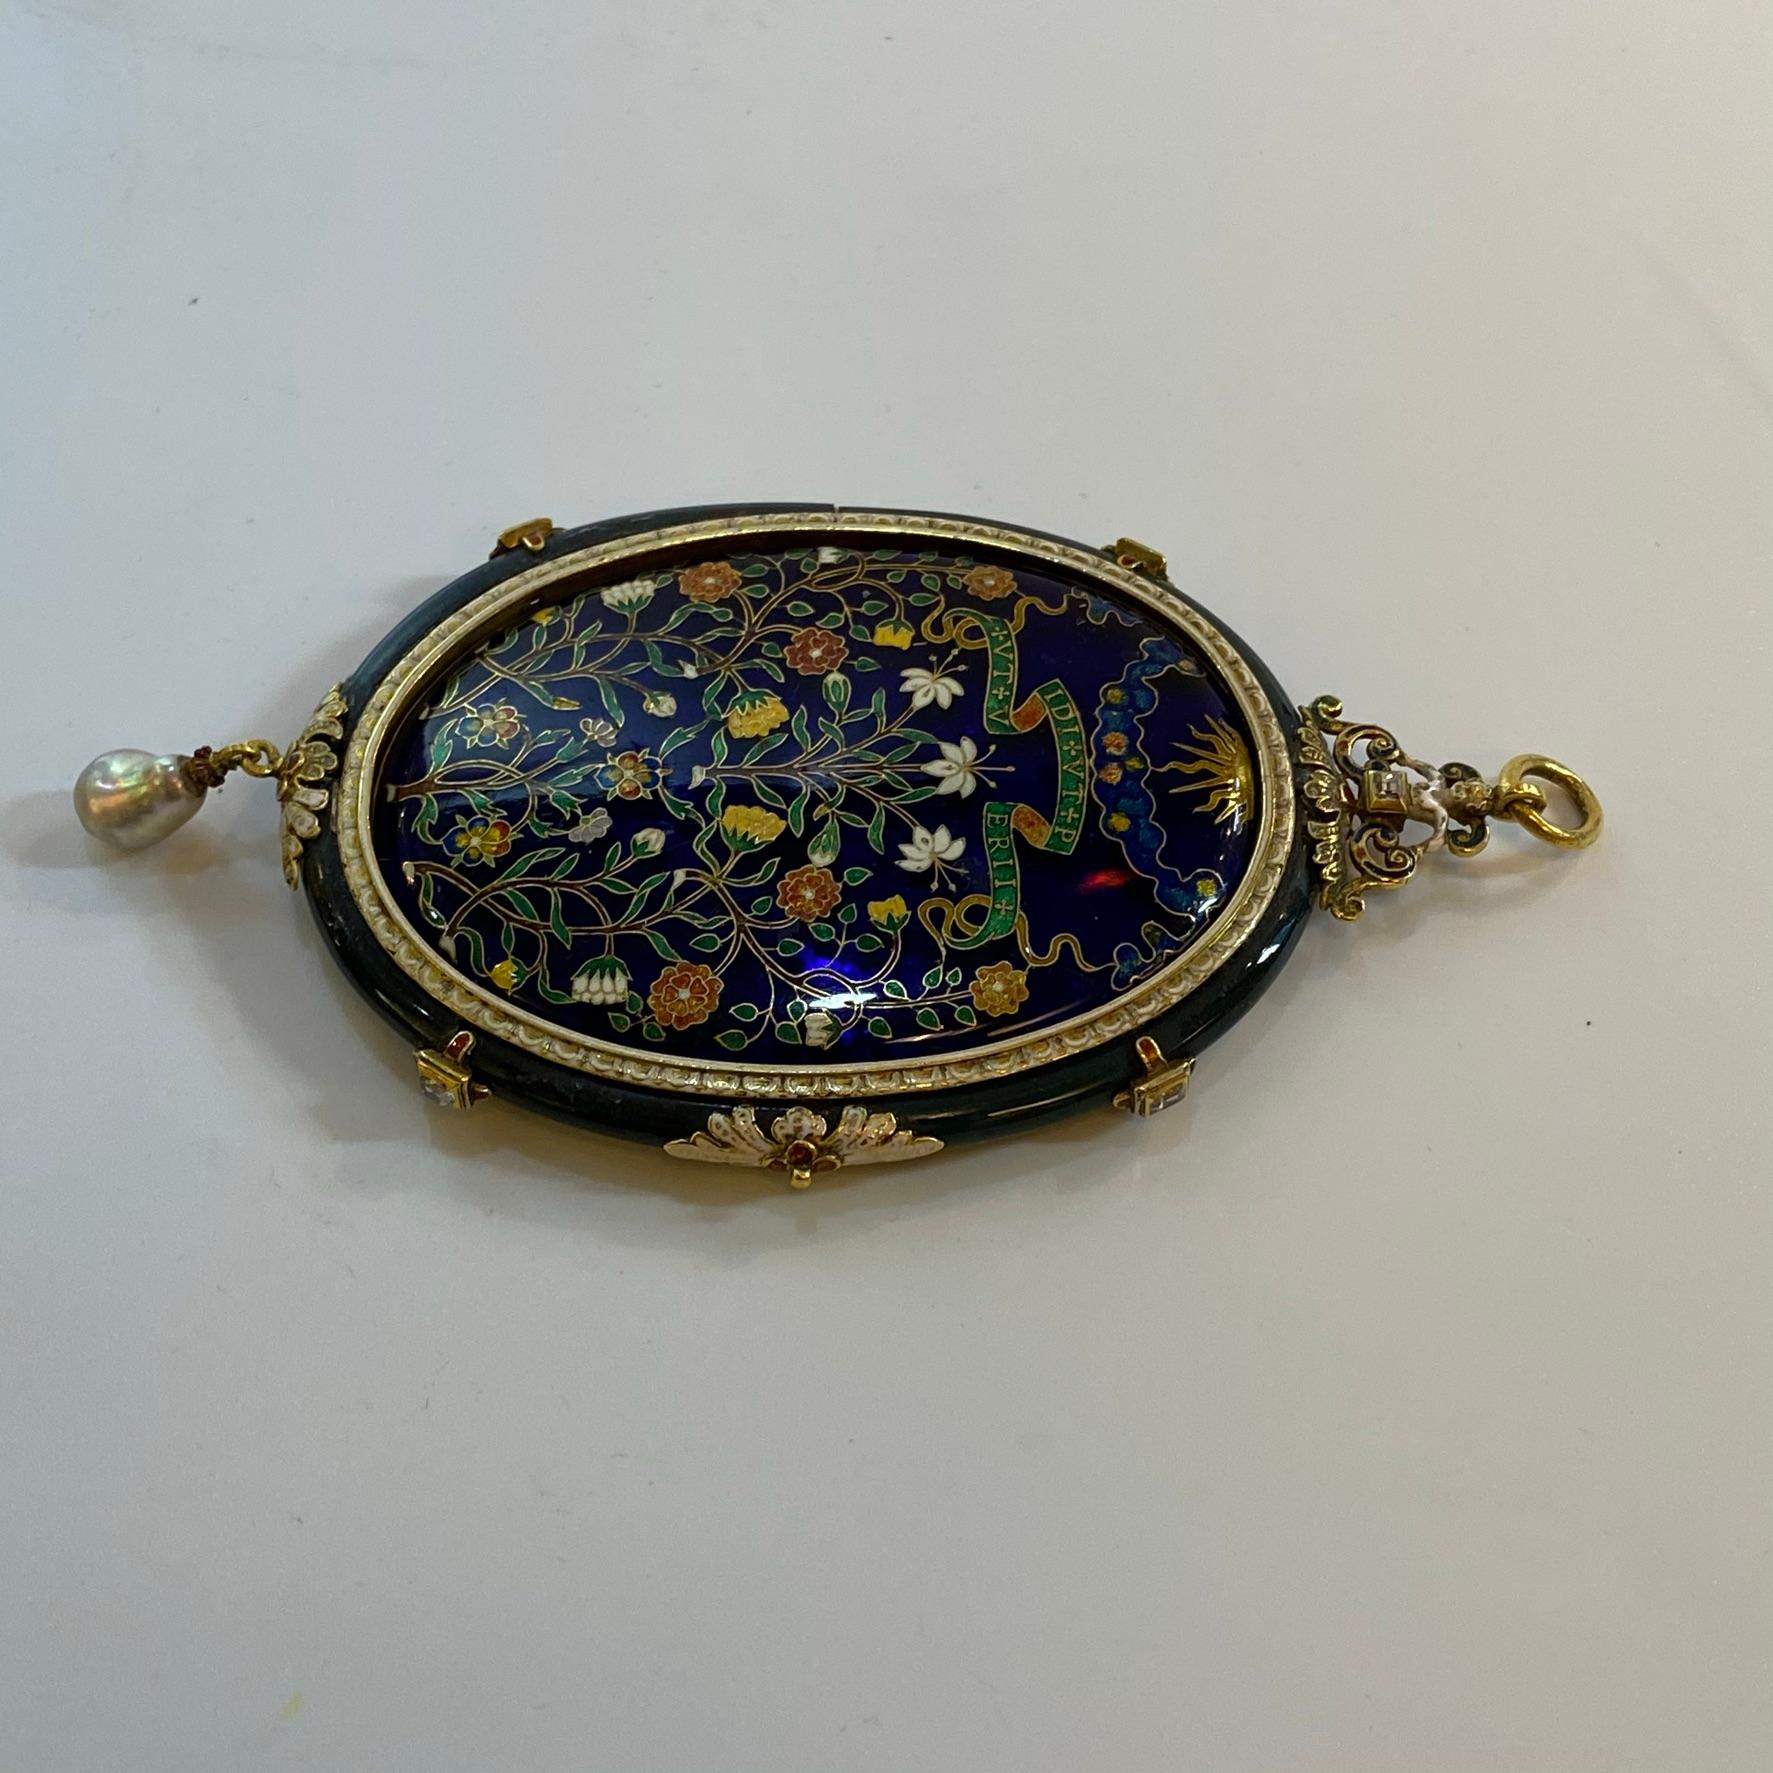 19th Century Medieval Style Cloisonne Enamel Mirror Pendant with Latin Inscriptions